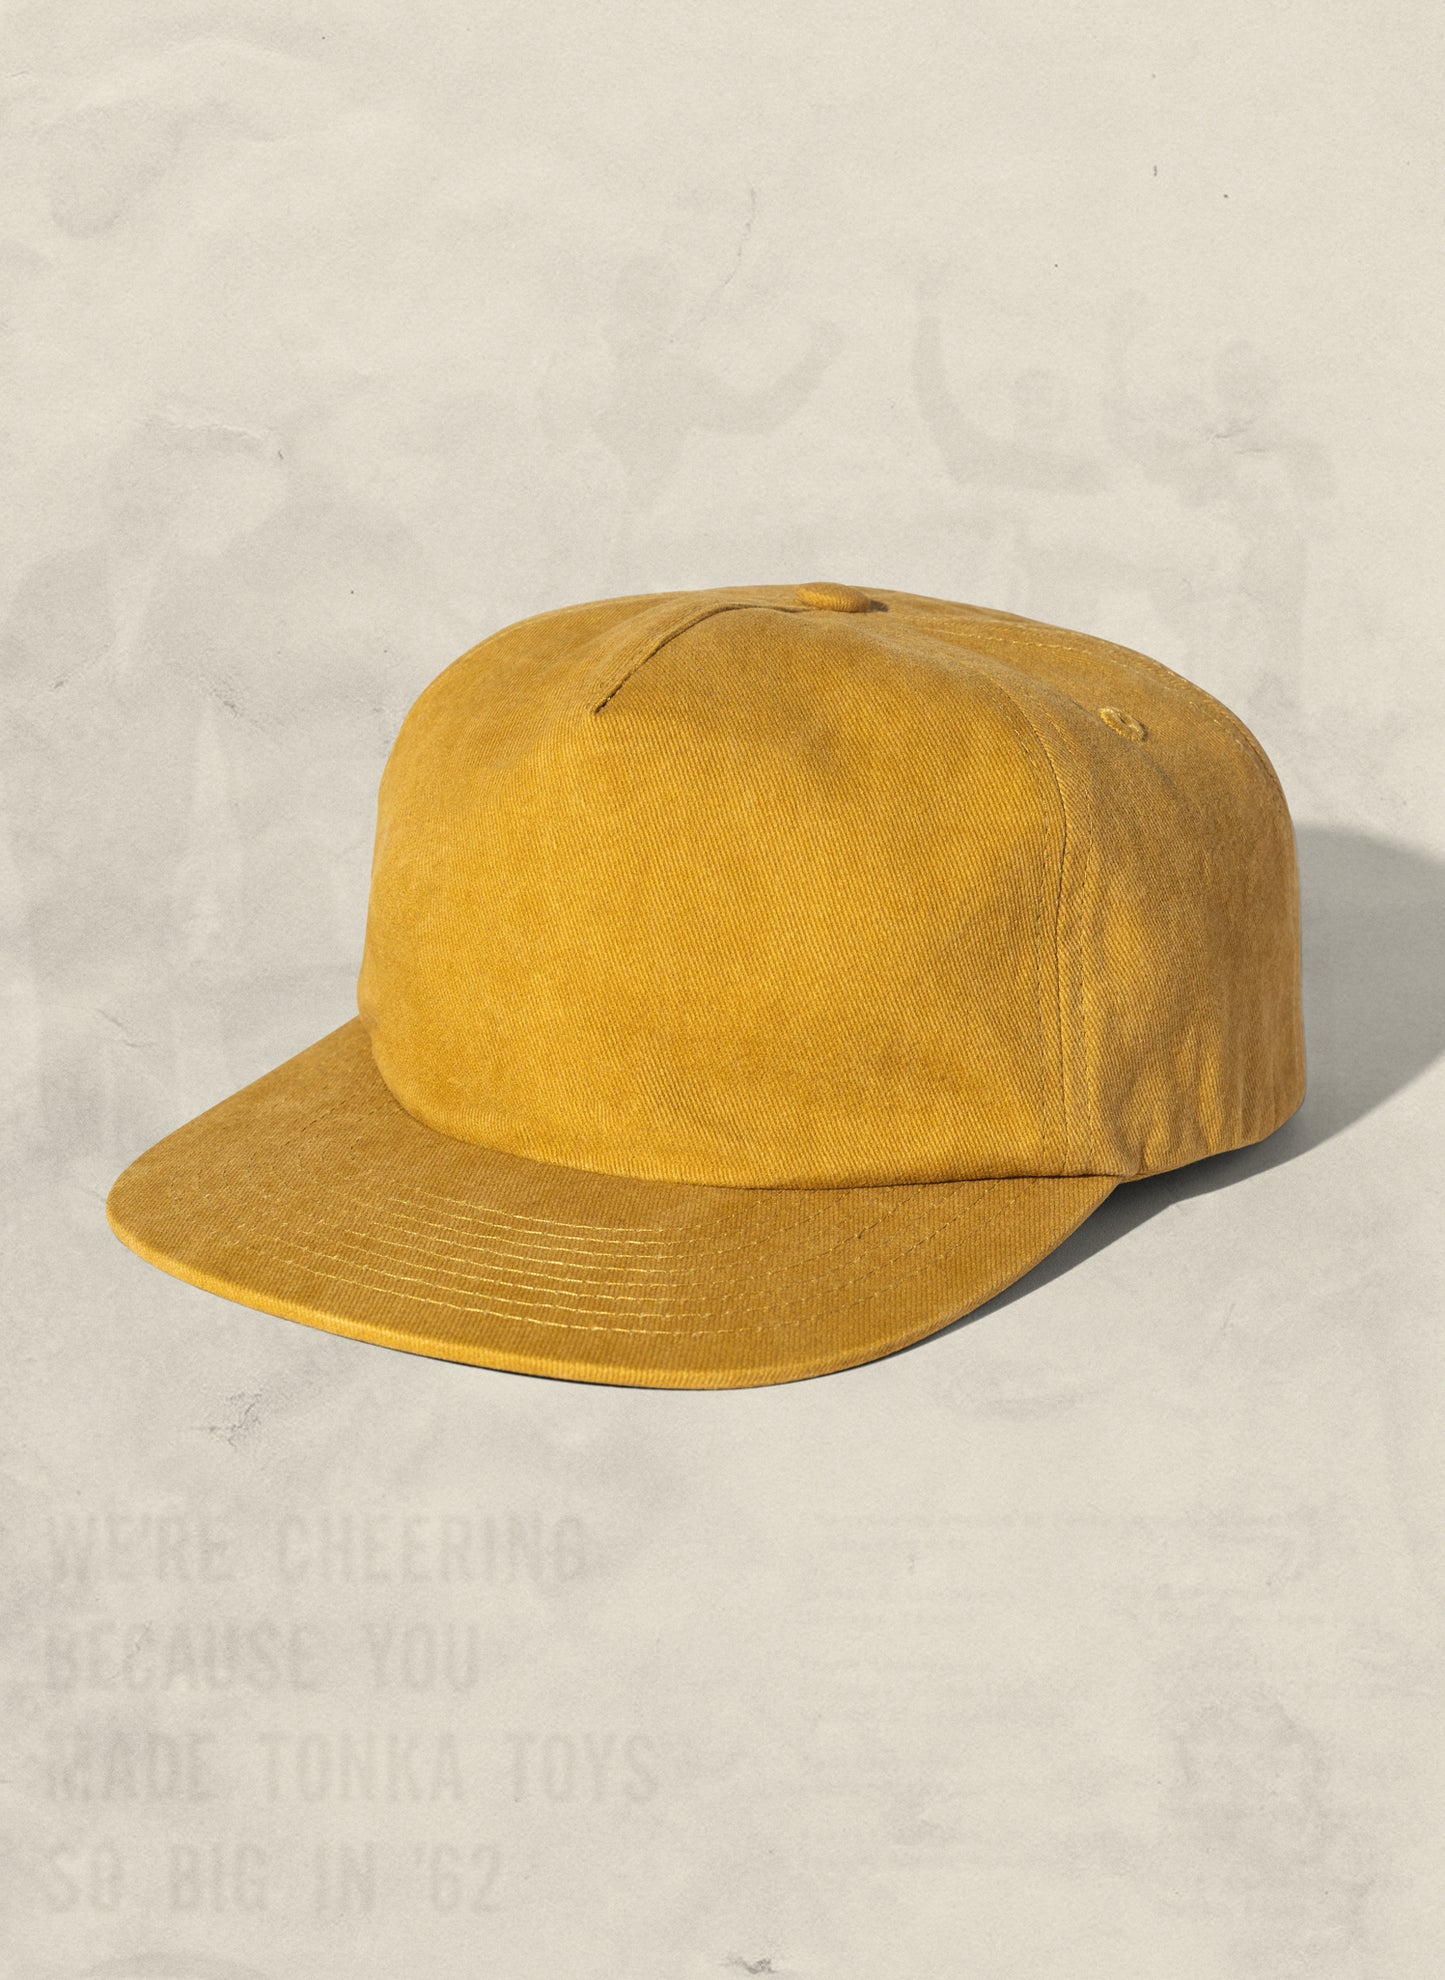 Weld Mfg Washed Brushed Cotton Twill Pigment Dyed Unstructured 5 Panel Vintage Inspired Baseball Strapback Hat - Laid Back Headwear - Mustard